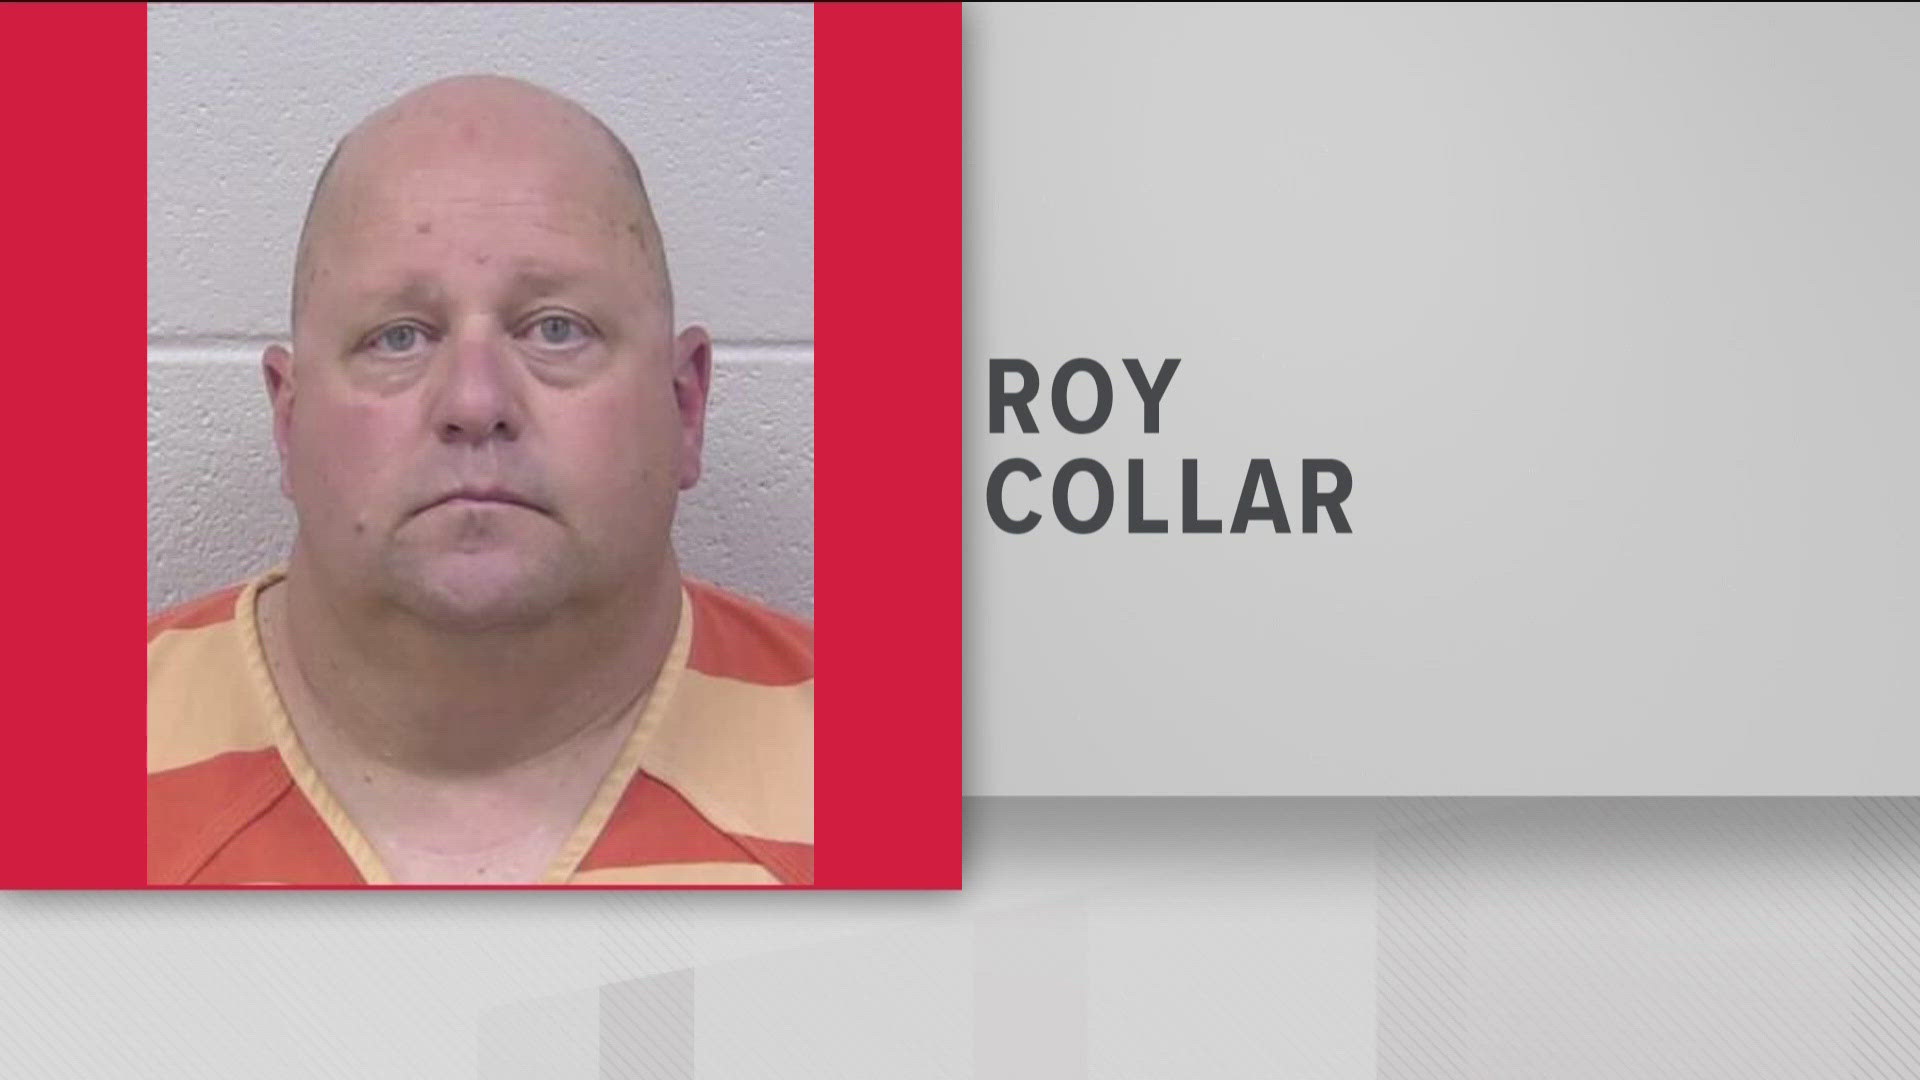 The Georgia Bureau of Investigation charged Roy Collar with two counts of distributing child sexual abuse material.